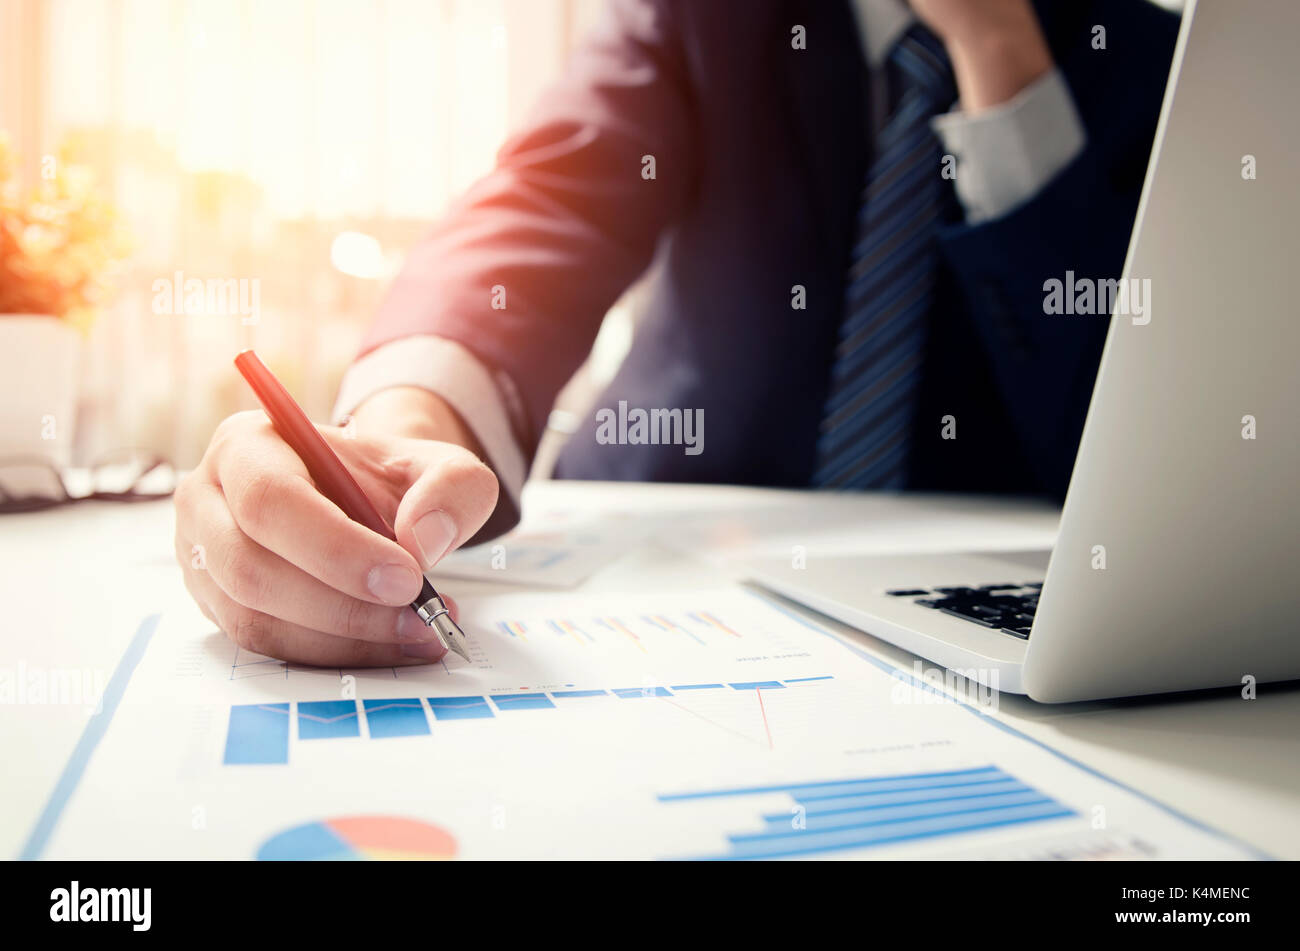 Professional manager working with finance document. Accountant signing finance report. Analysis working budget accounting startup economy man concept Stock Photo